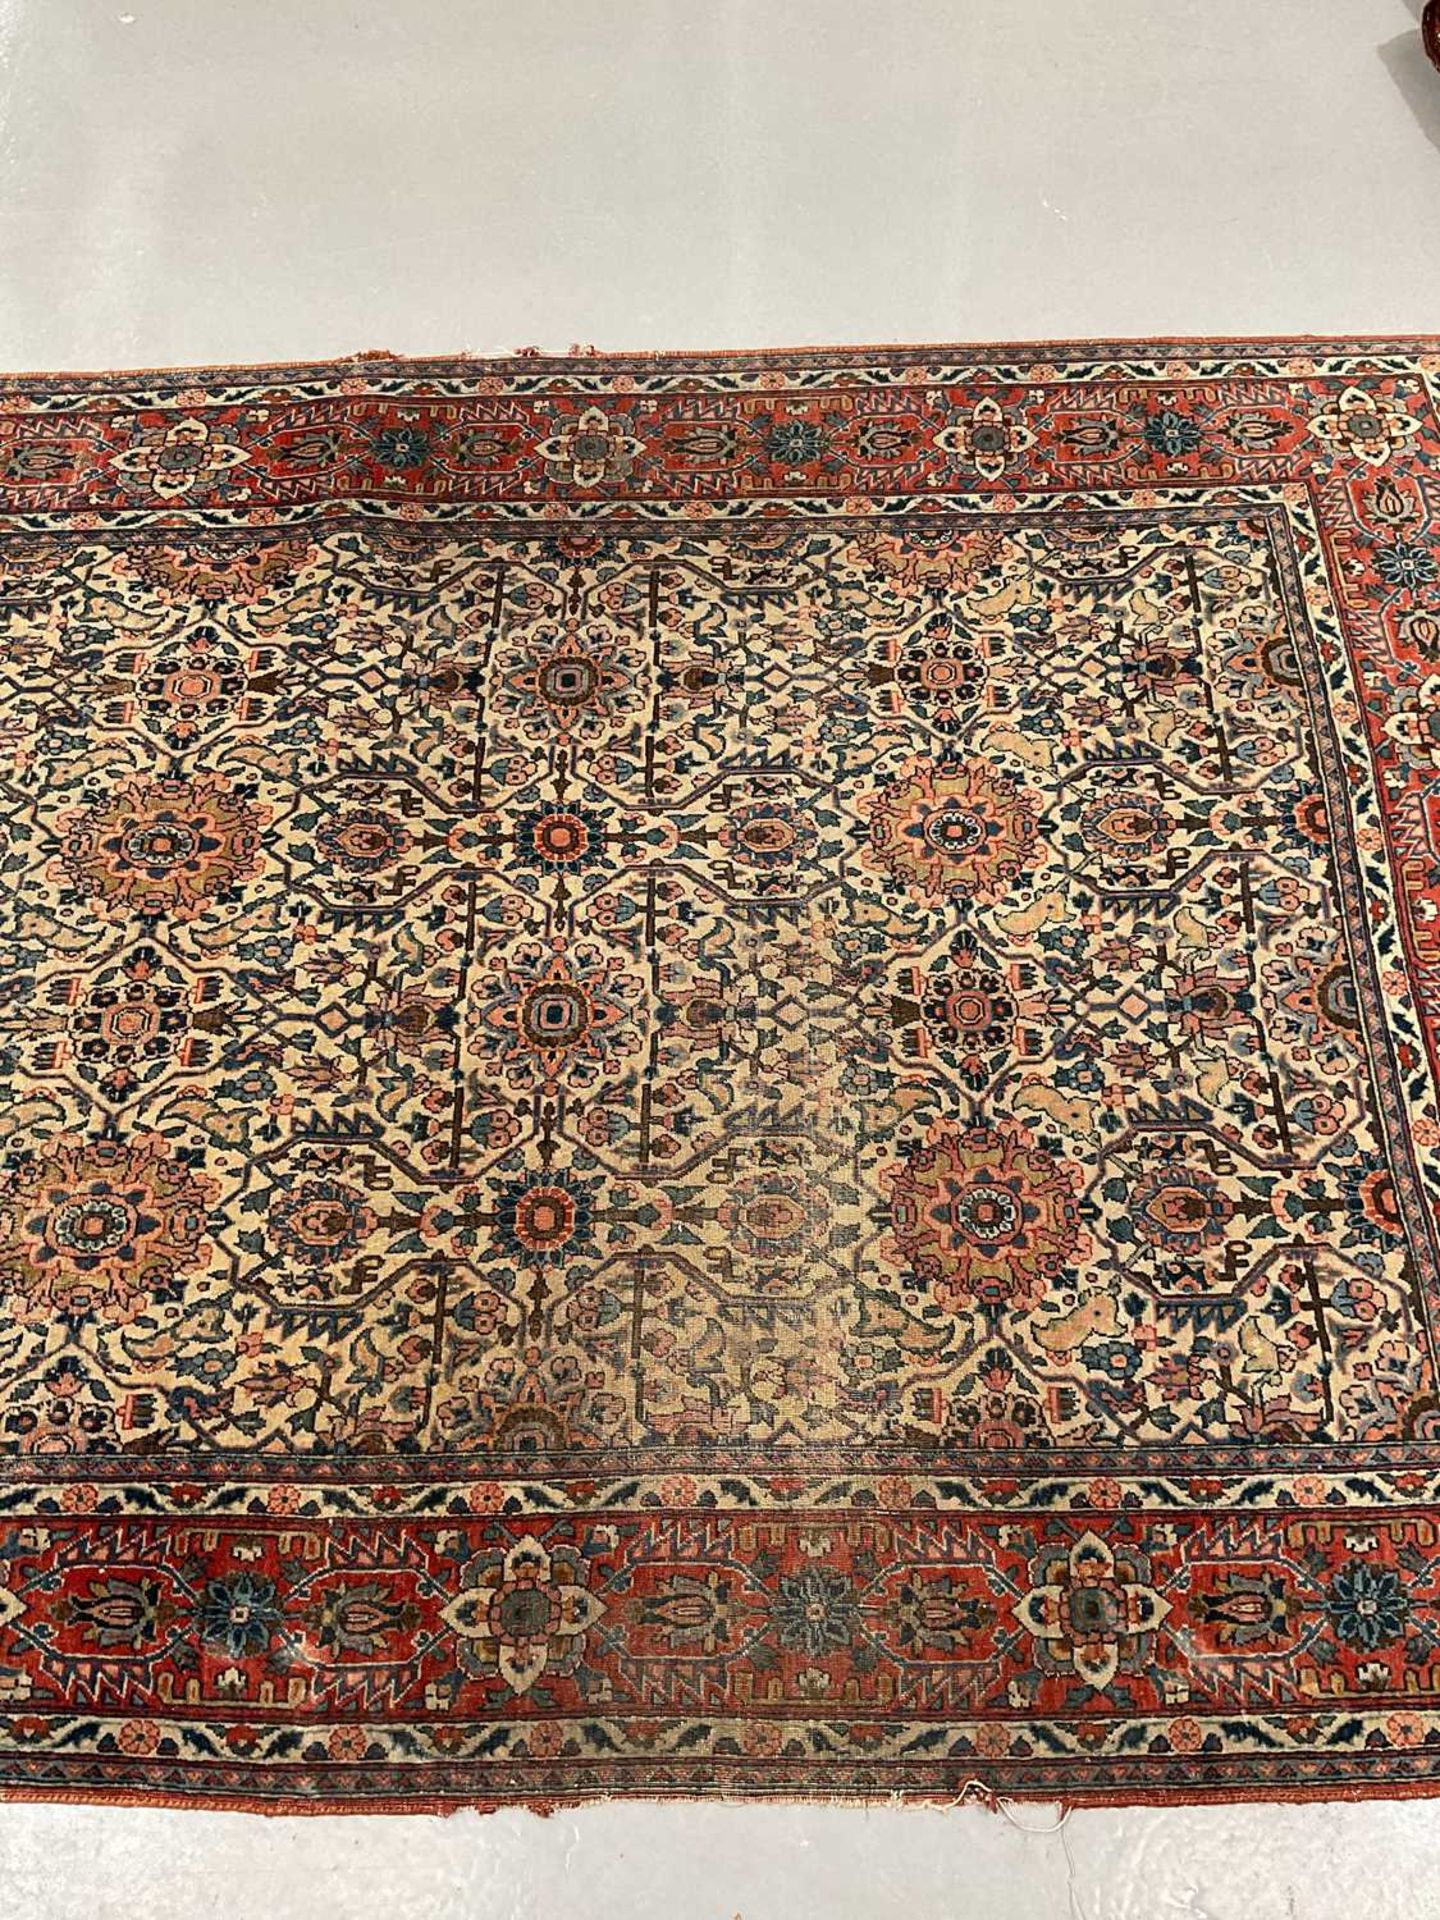 An antique ivory ground Kerman rug with an allover floral design within multiple borders 202 x 137cm - Image 4 of 10